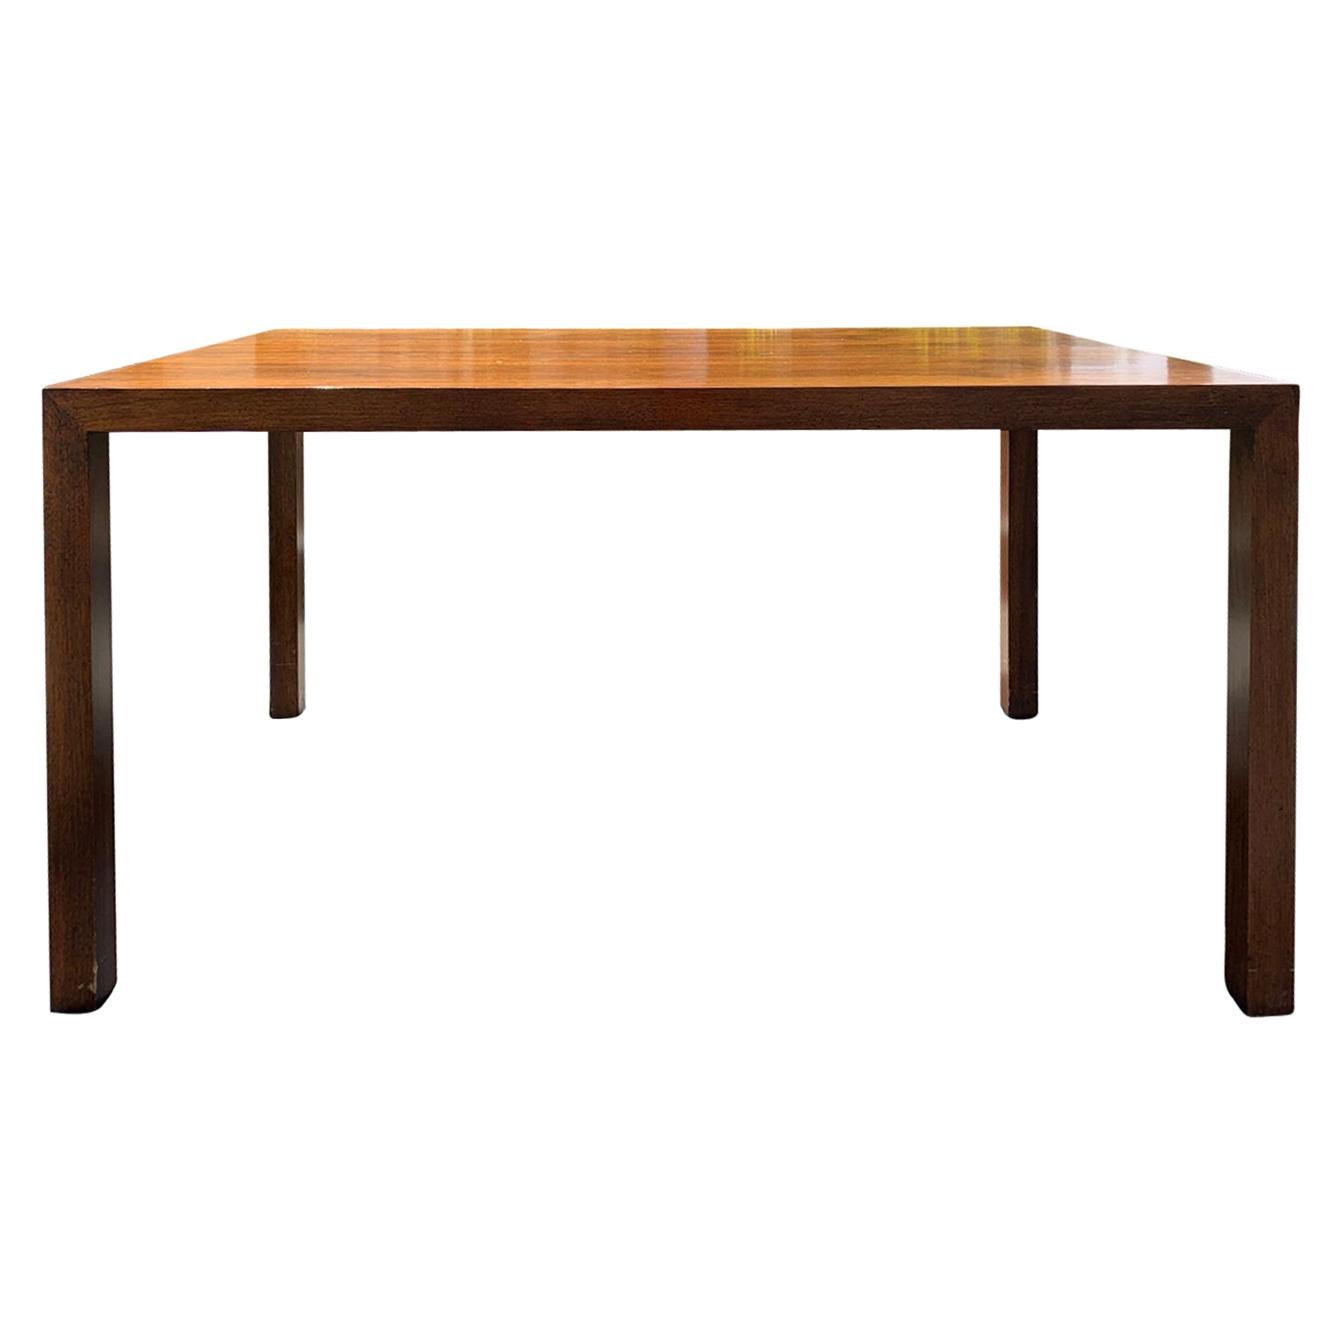 Mid-20th Century Modern Wood Dining Table in the Style of Wormly for Dunbar For Sale